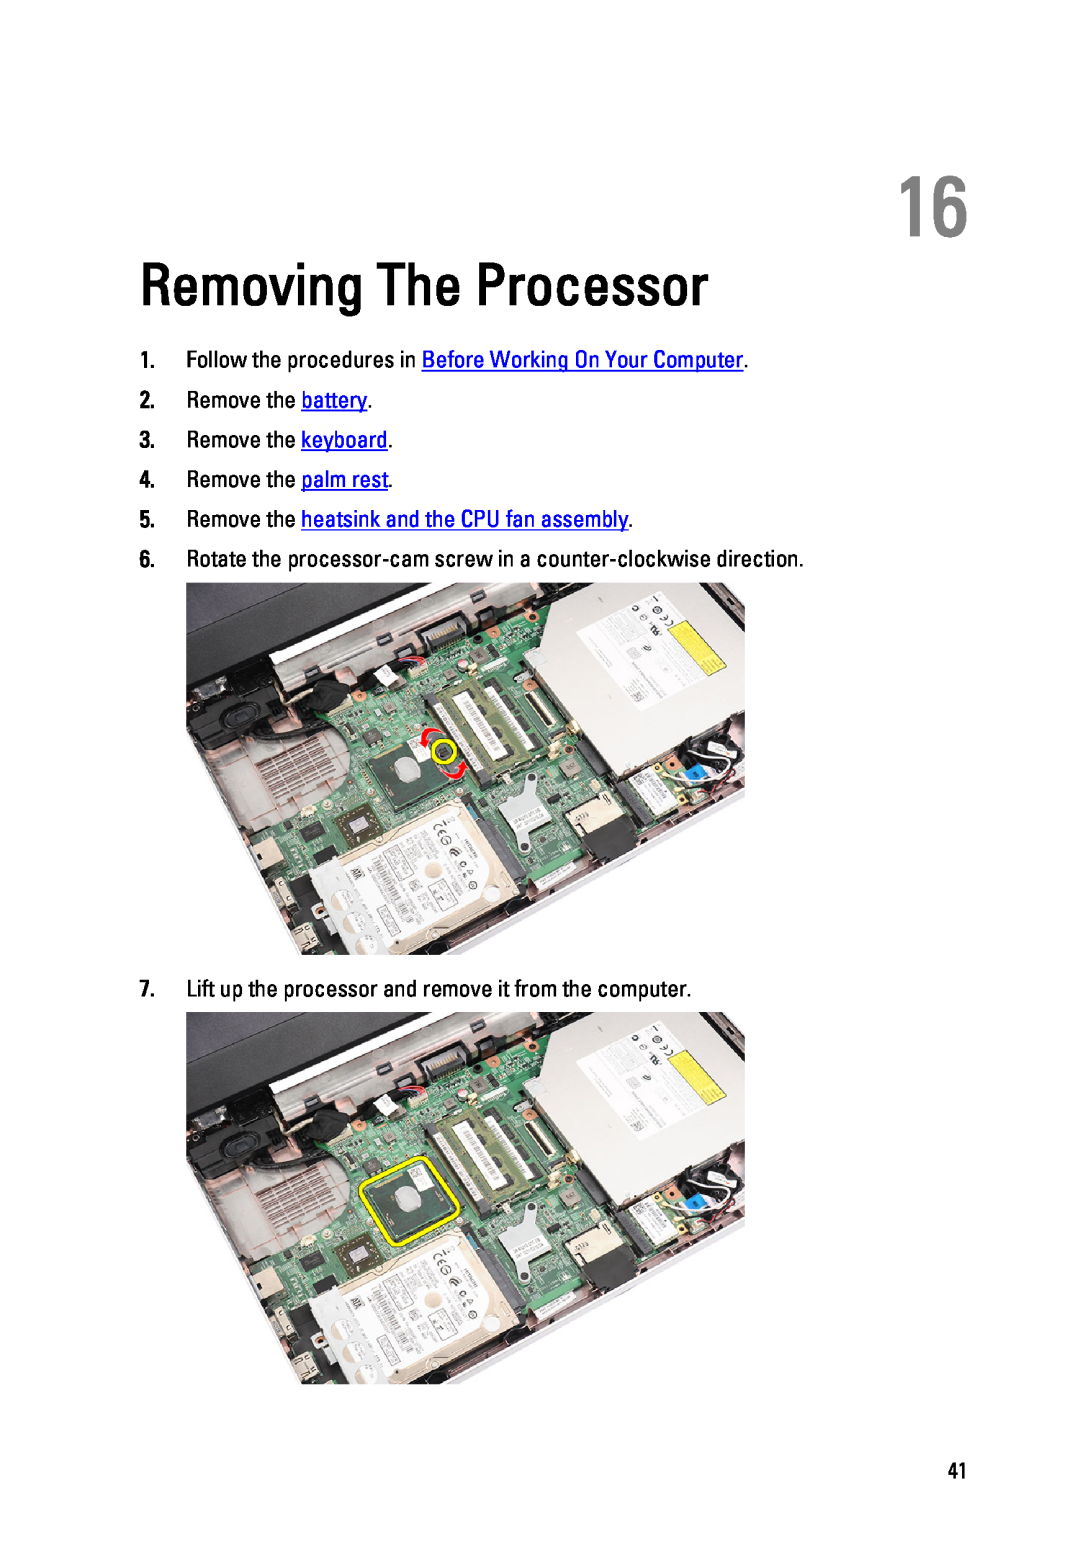 Dell P22G owner manual Removing The Processor, Remove the heatsink and the CPU fan assembly 